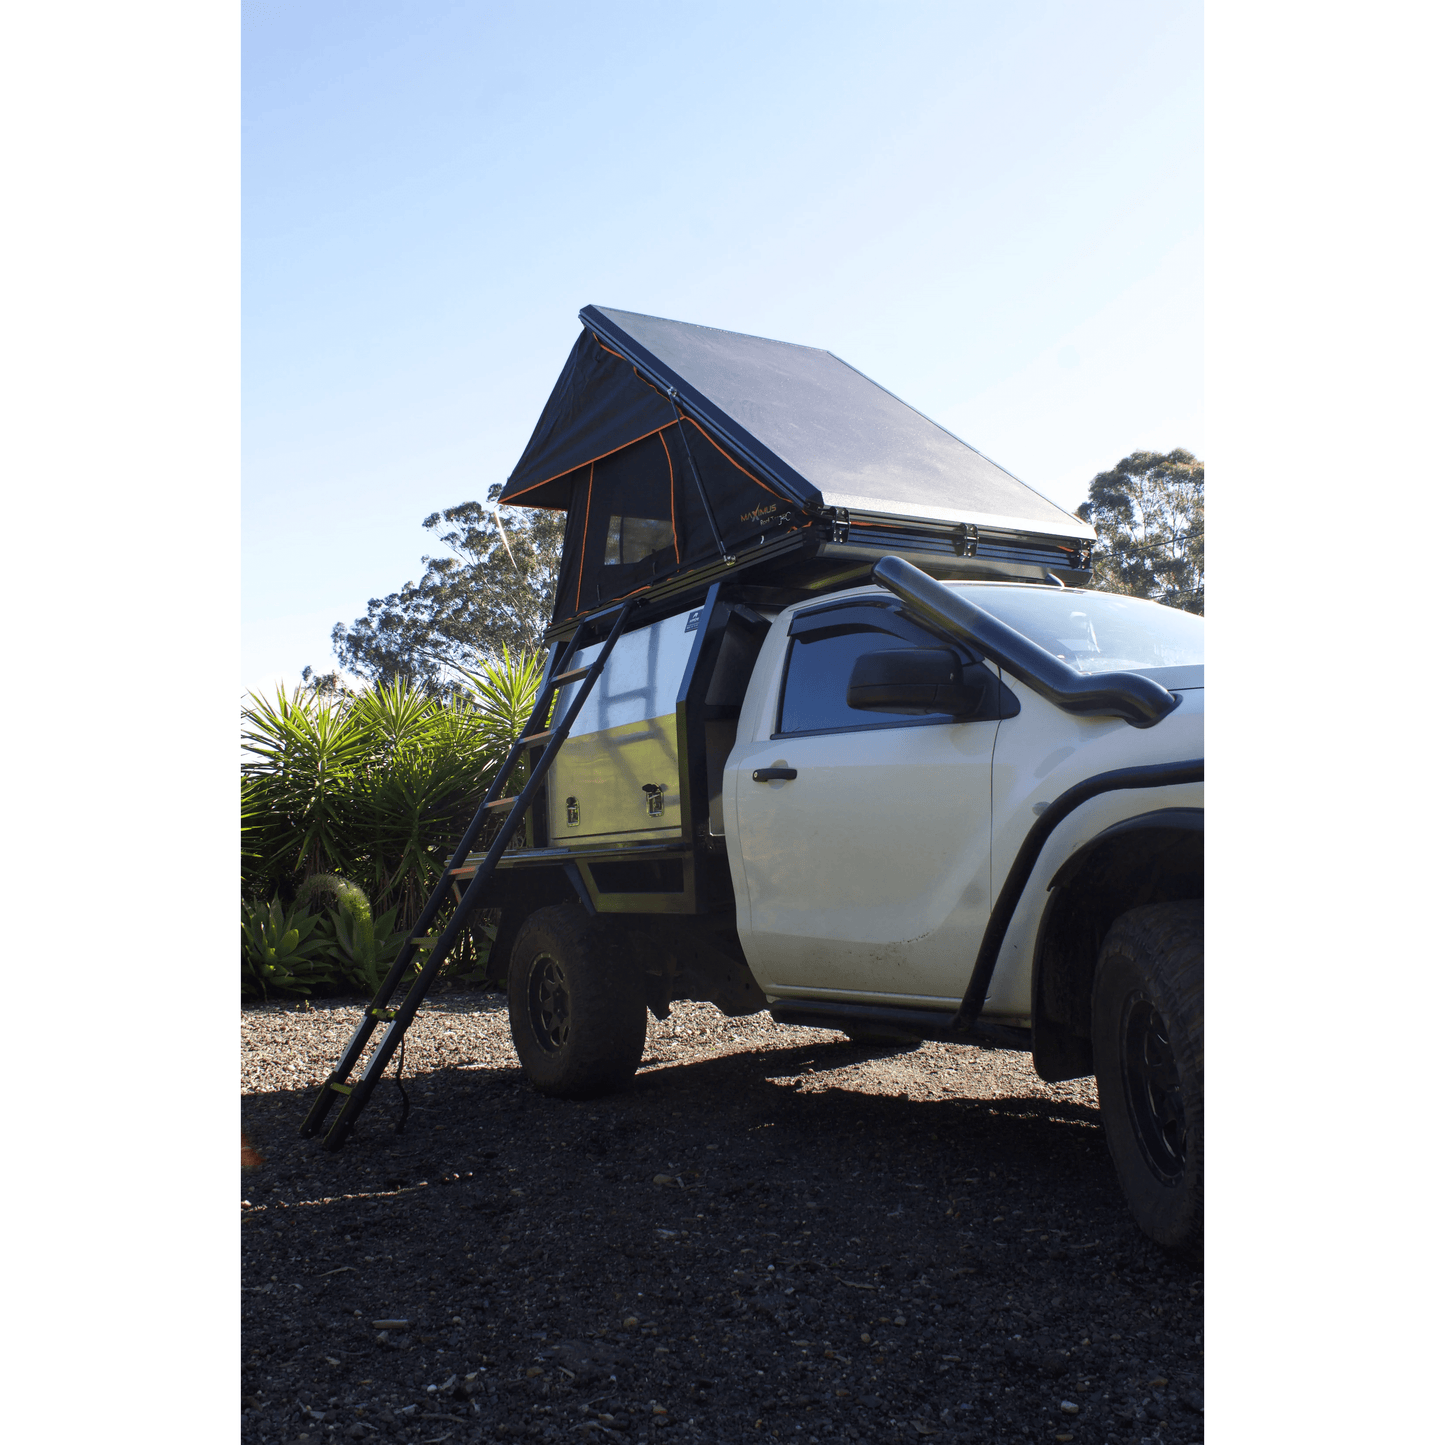 Hard shell rooftop tent retractable ladder